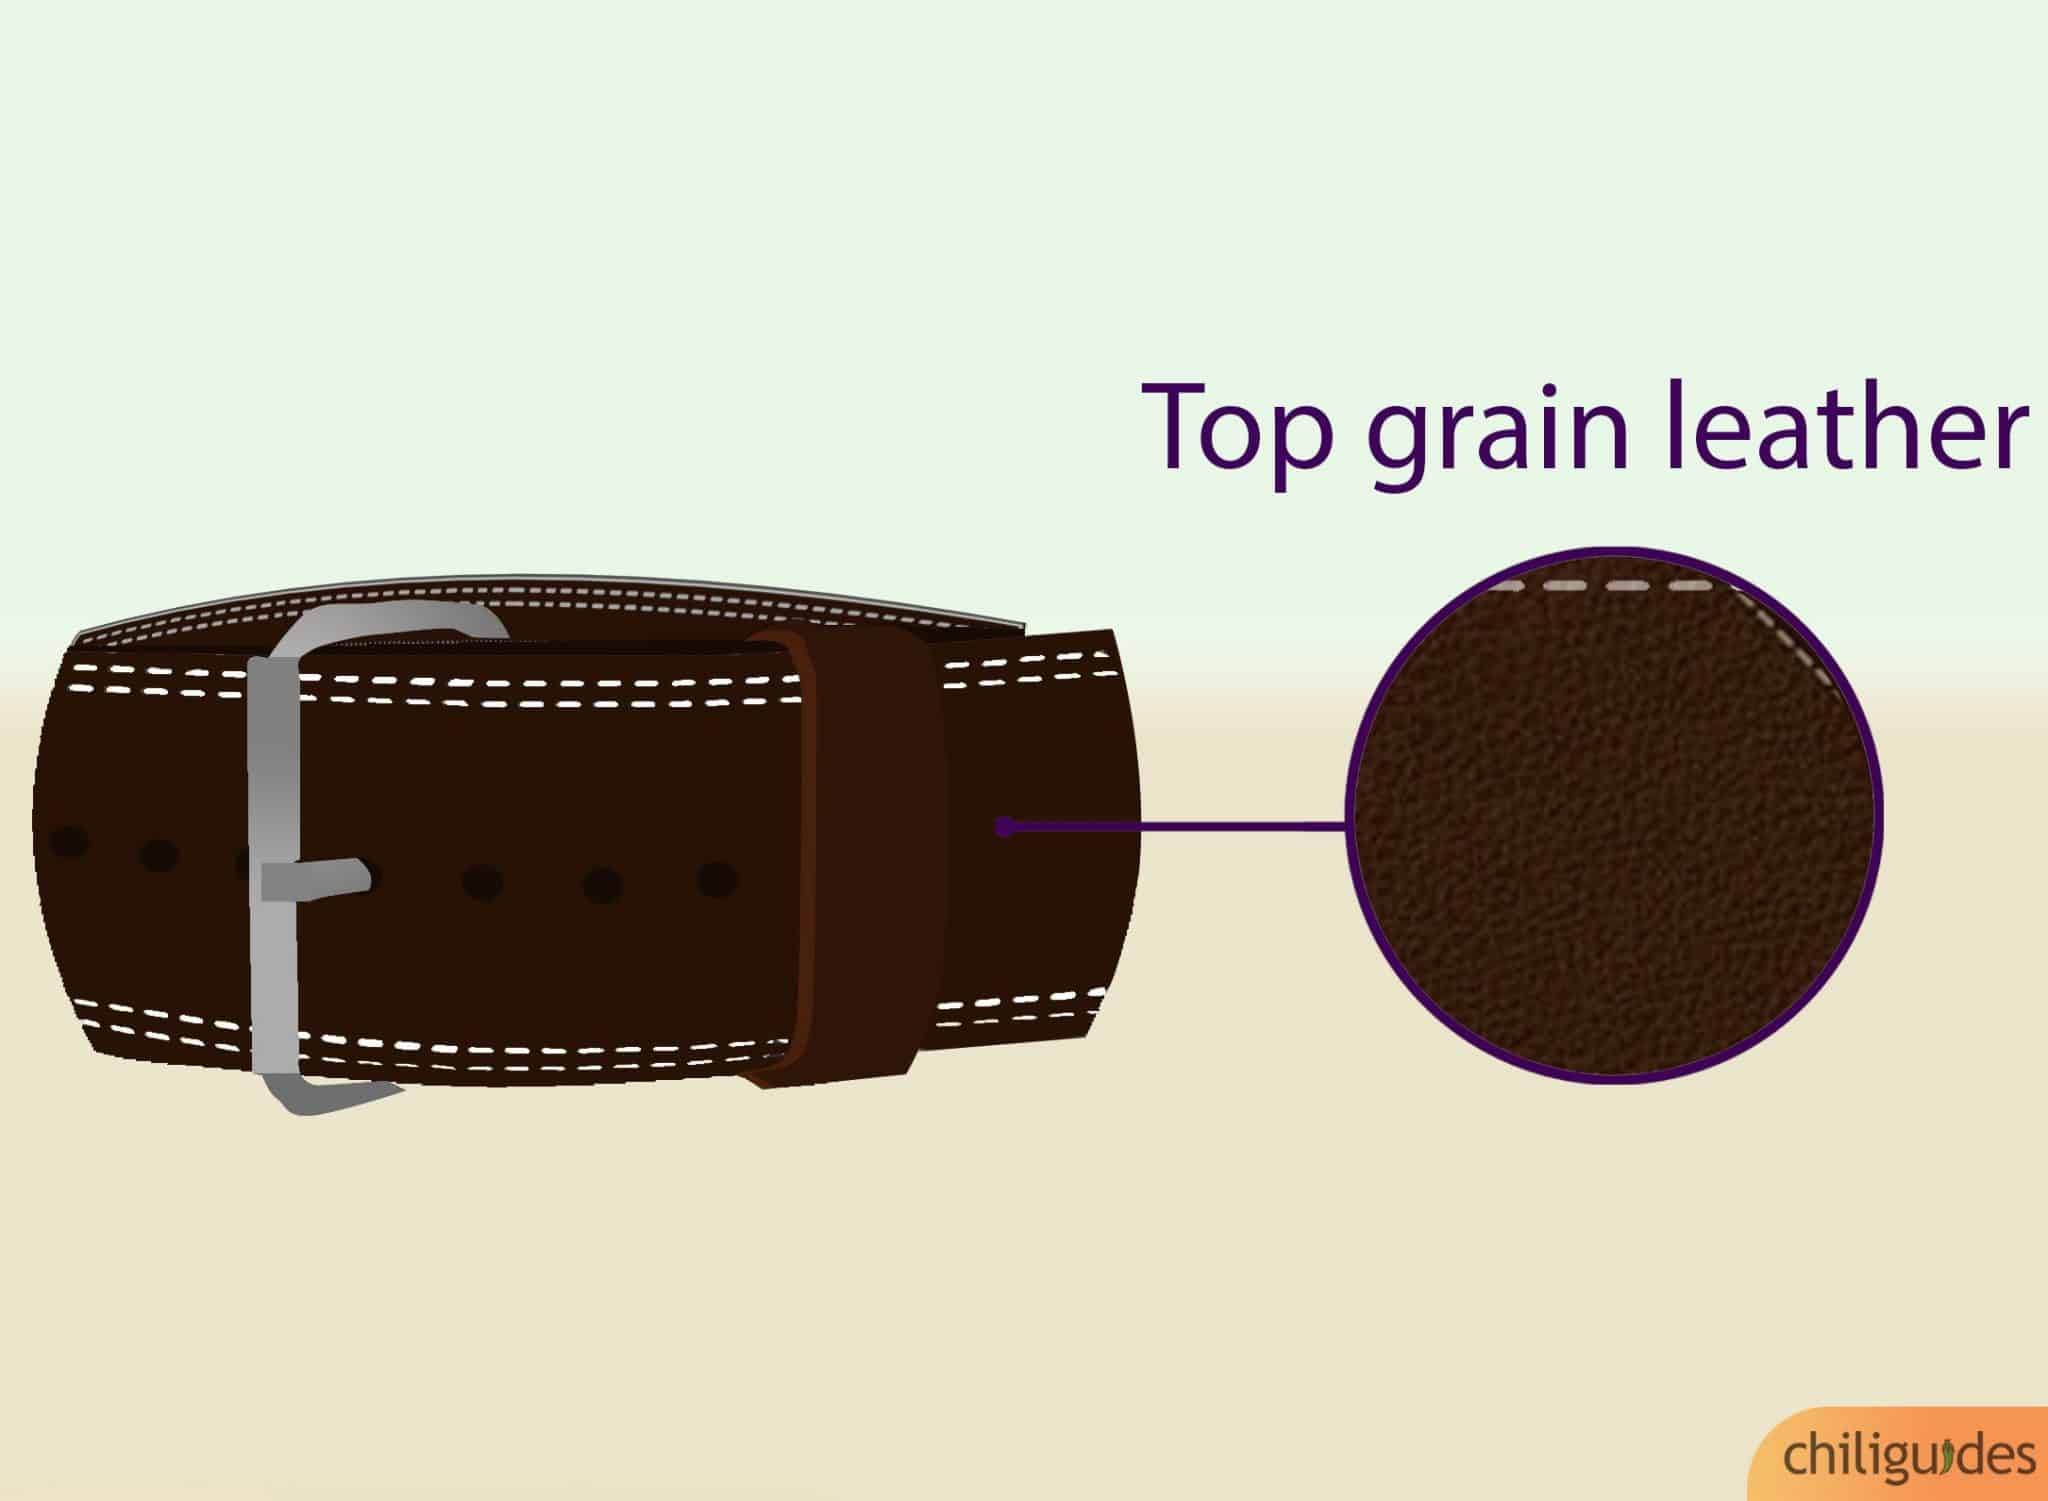 Test the thickness, and get “top grain leather”.